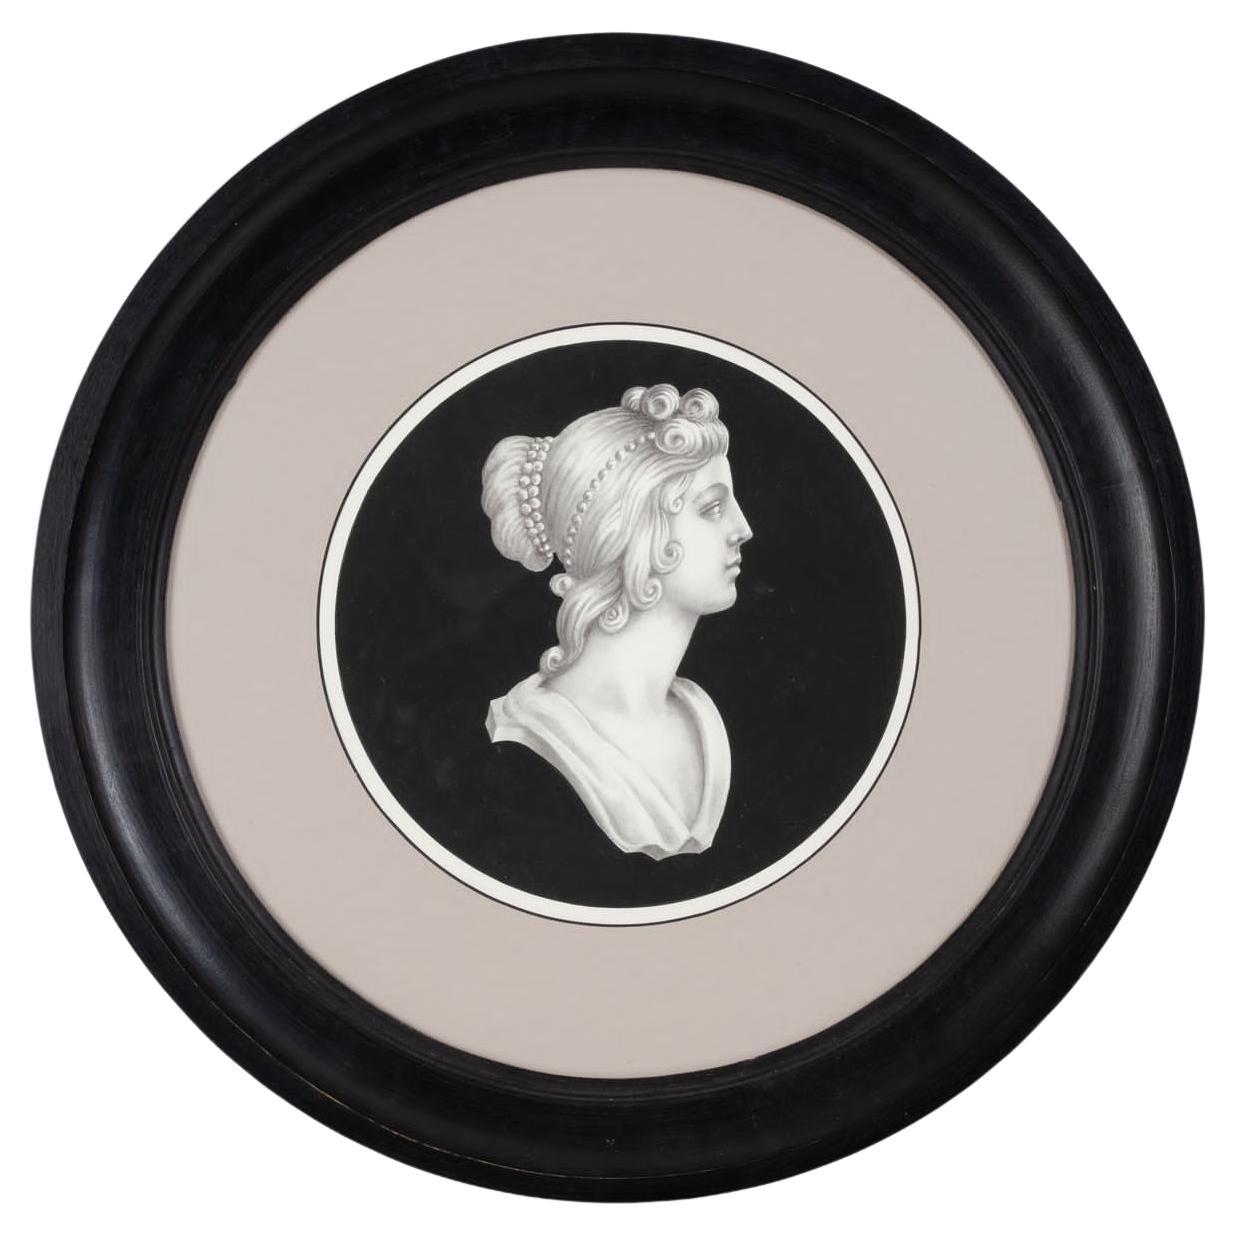 One of two beautiful neoclasssical woman profile print with black background, framed by  a delicate taupe passpartout and a round black frame. 
Each print is entirely printed in Italy by our mastercraftsmen.
The complete set can bee viewed on our